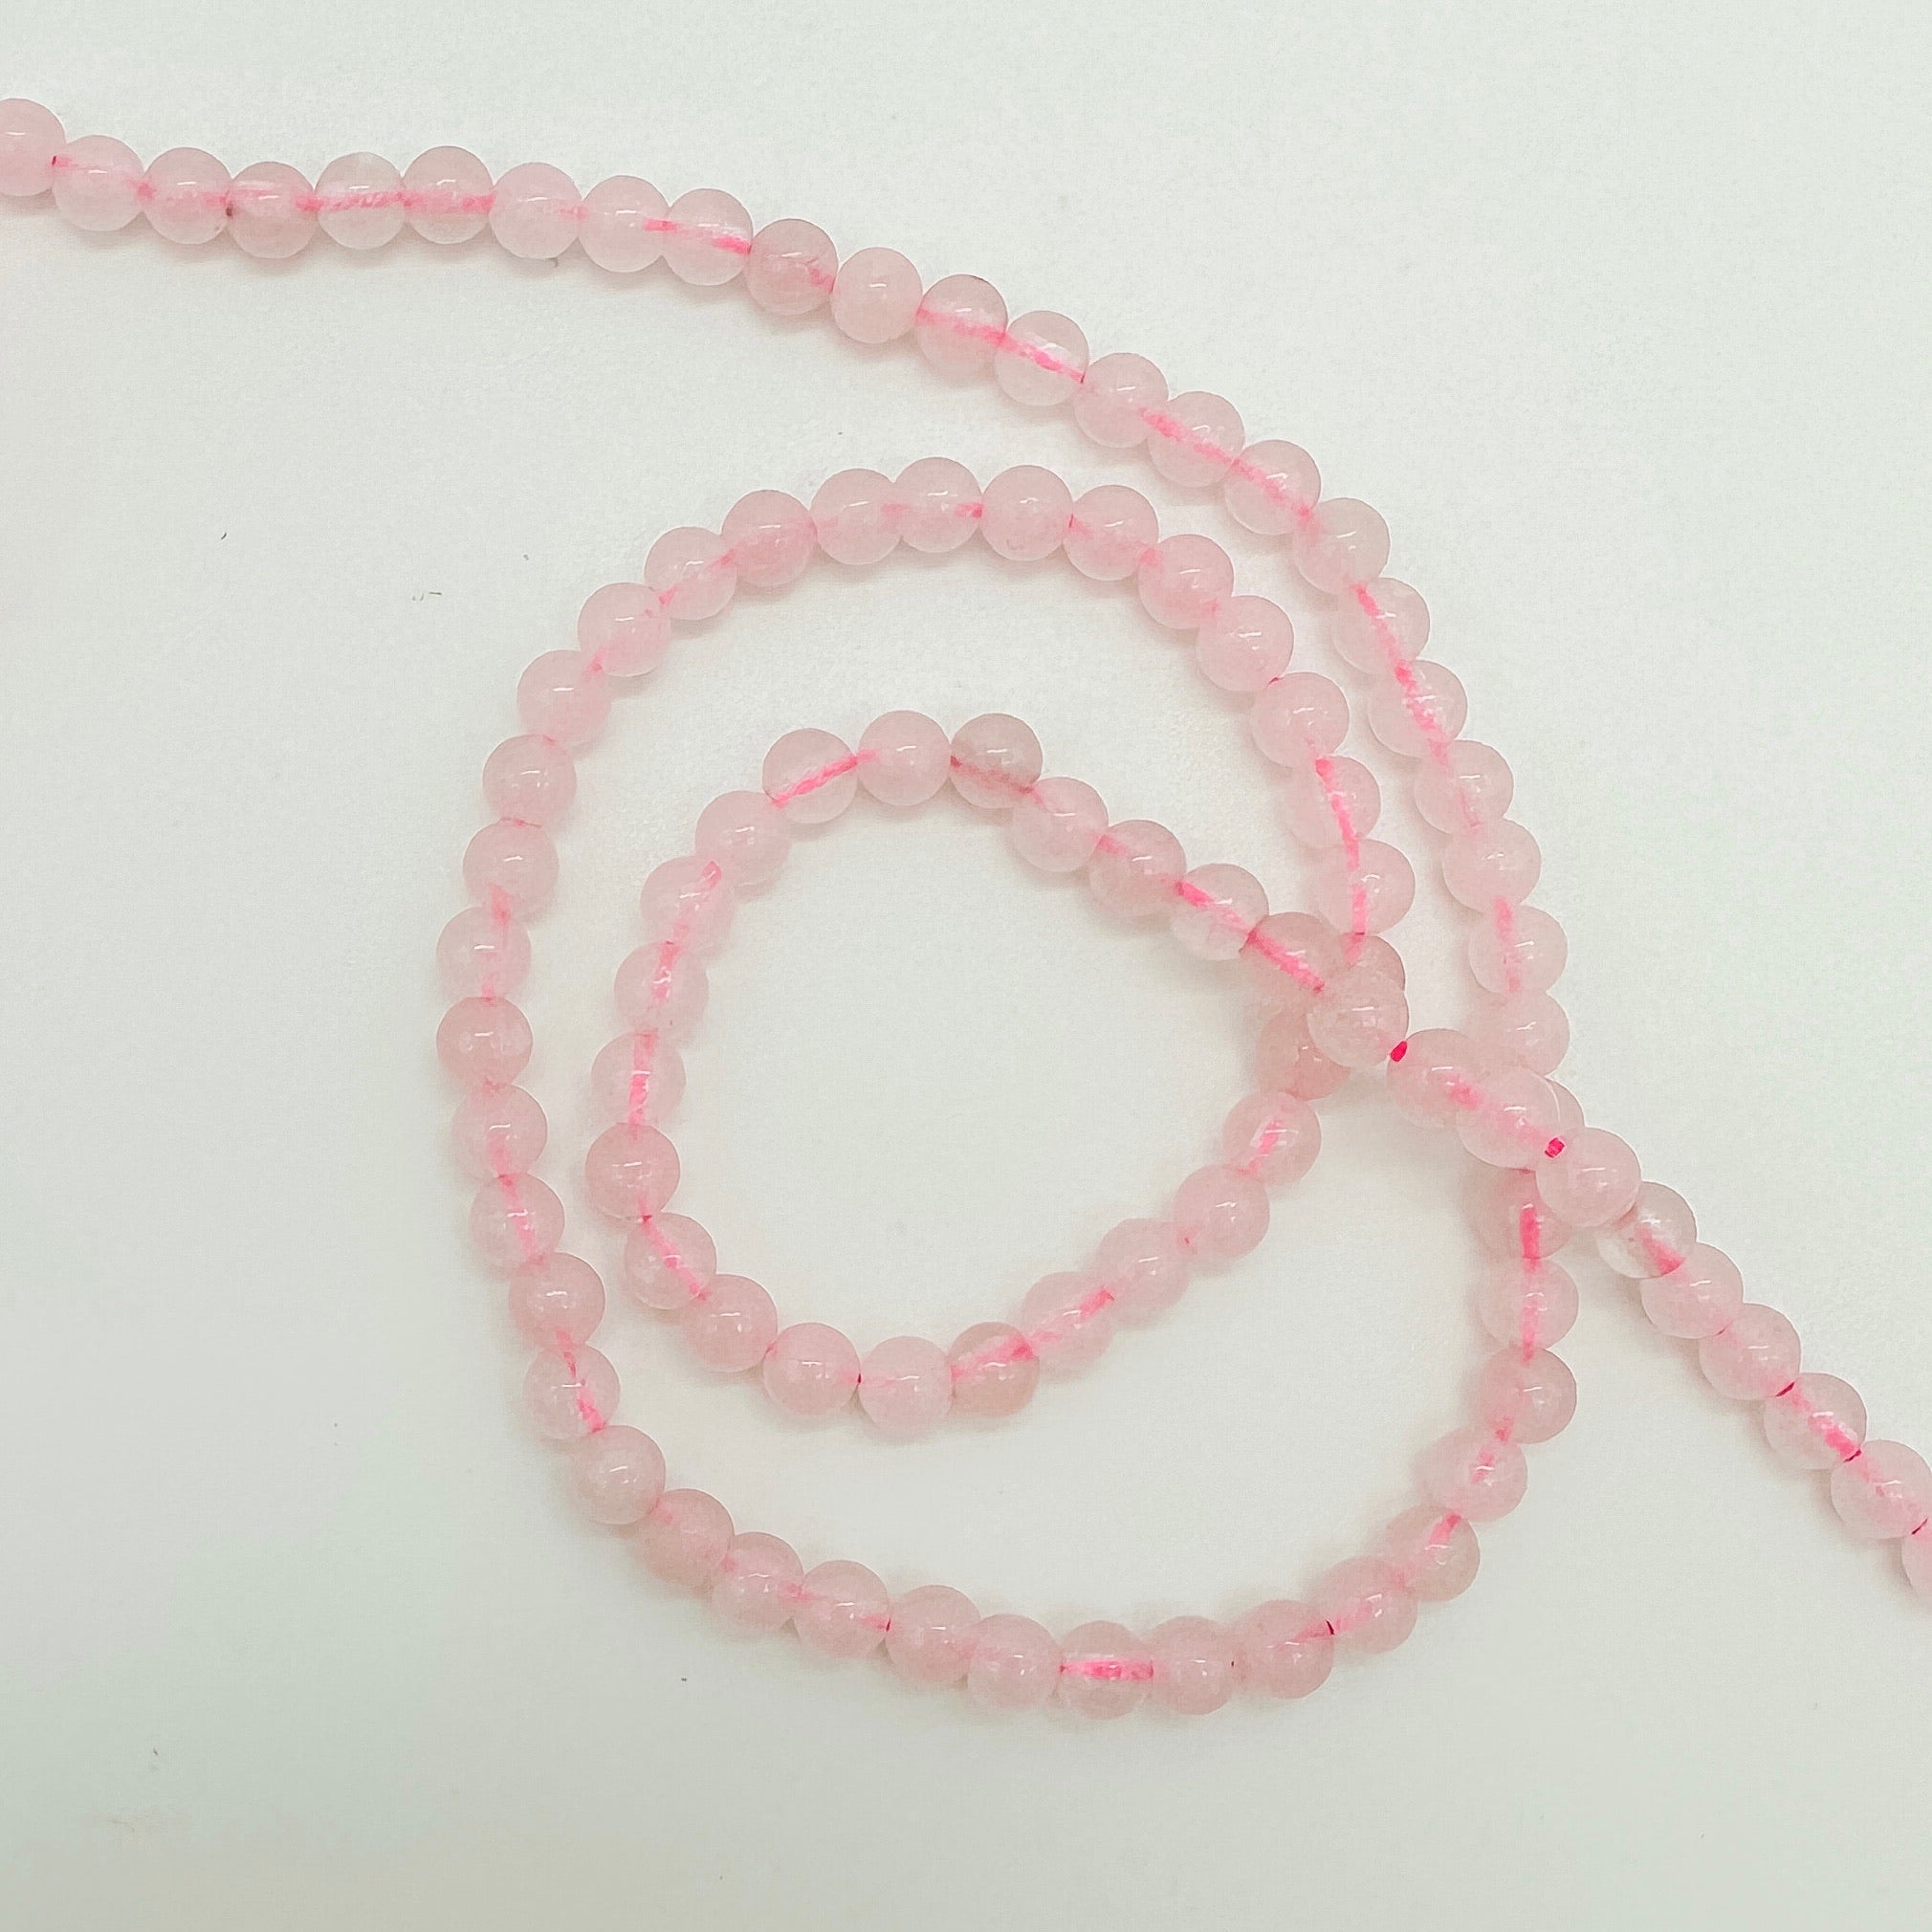 Natural Rose Quartz Beads Round Shape 4mm bead strands for jewelry making, beaded bracelets, jewelry supplies